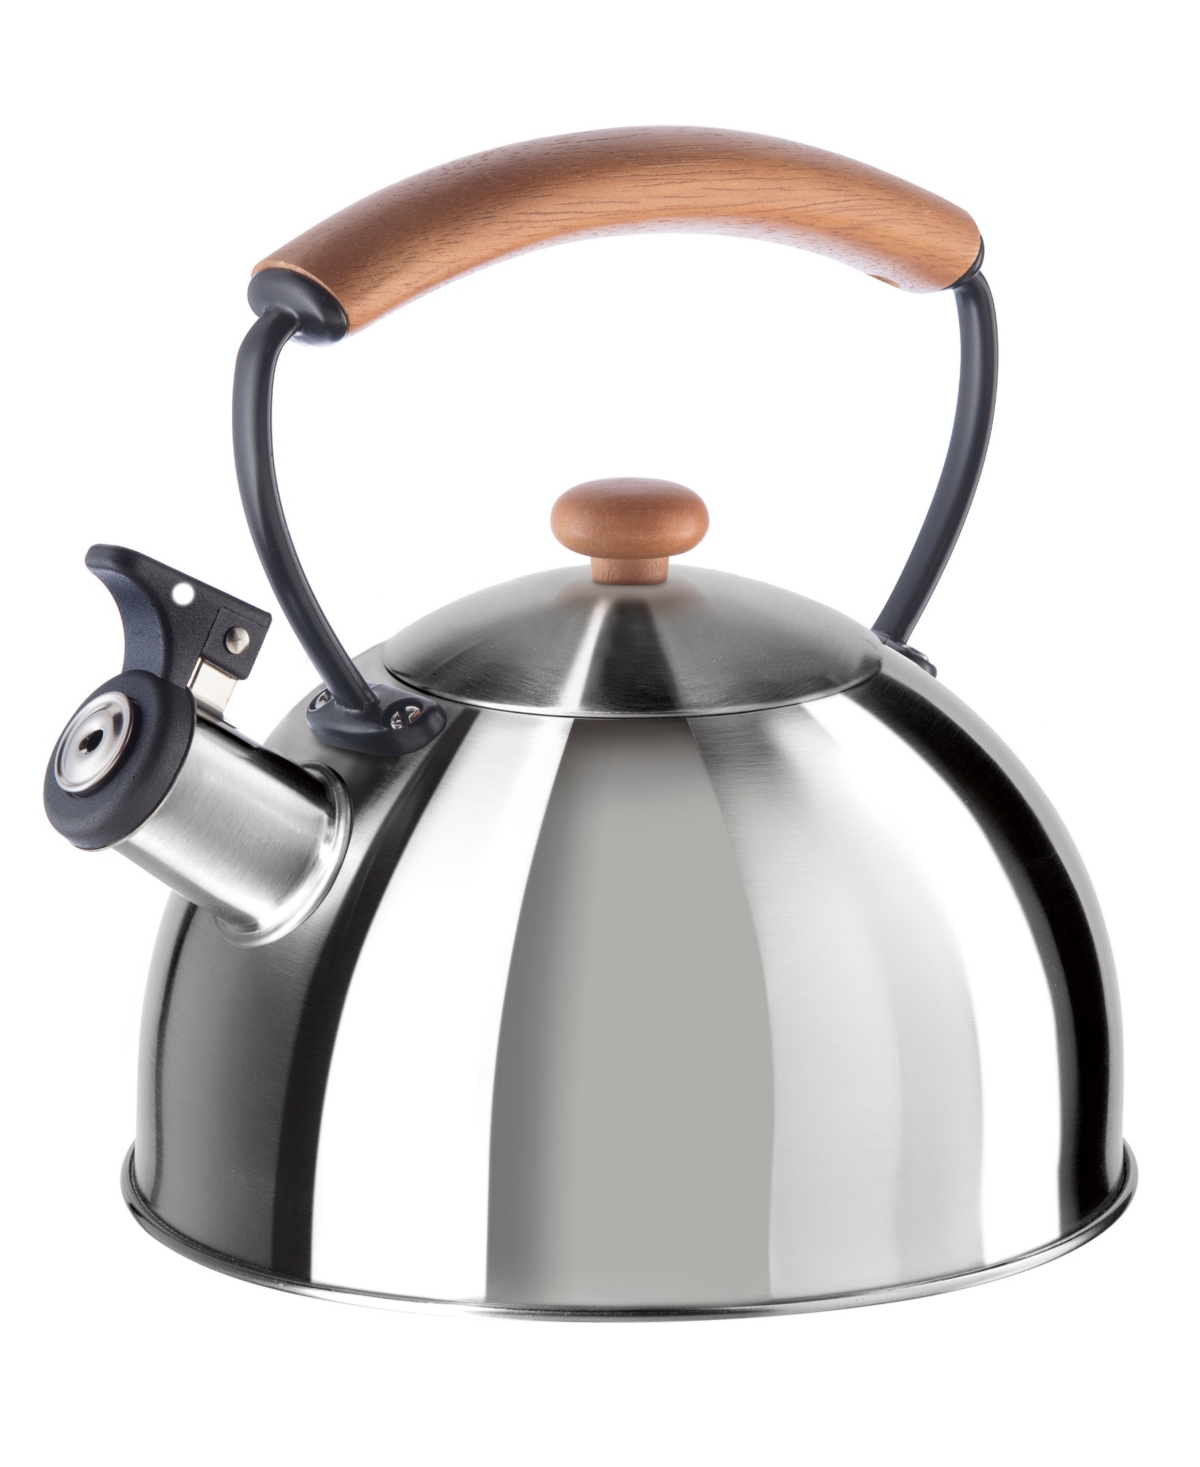 Oggi 2.5 Litre Whistling Tea Kettle With Wood Handle In Stainless Steel